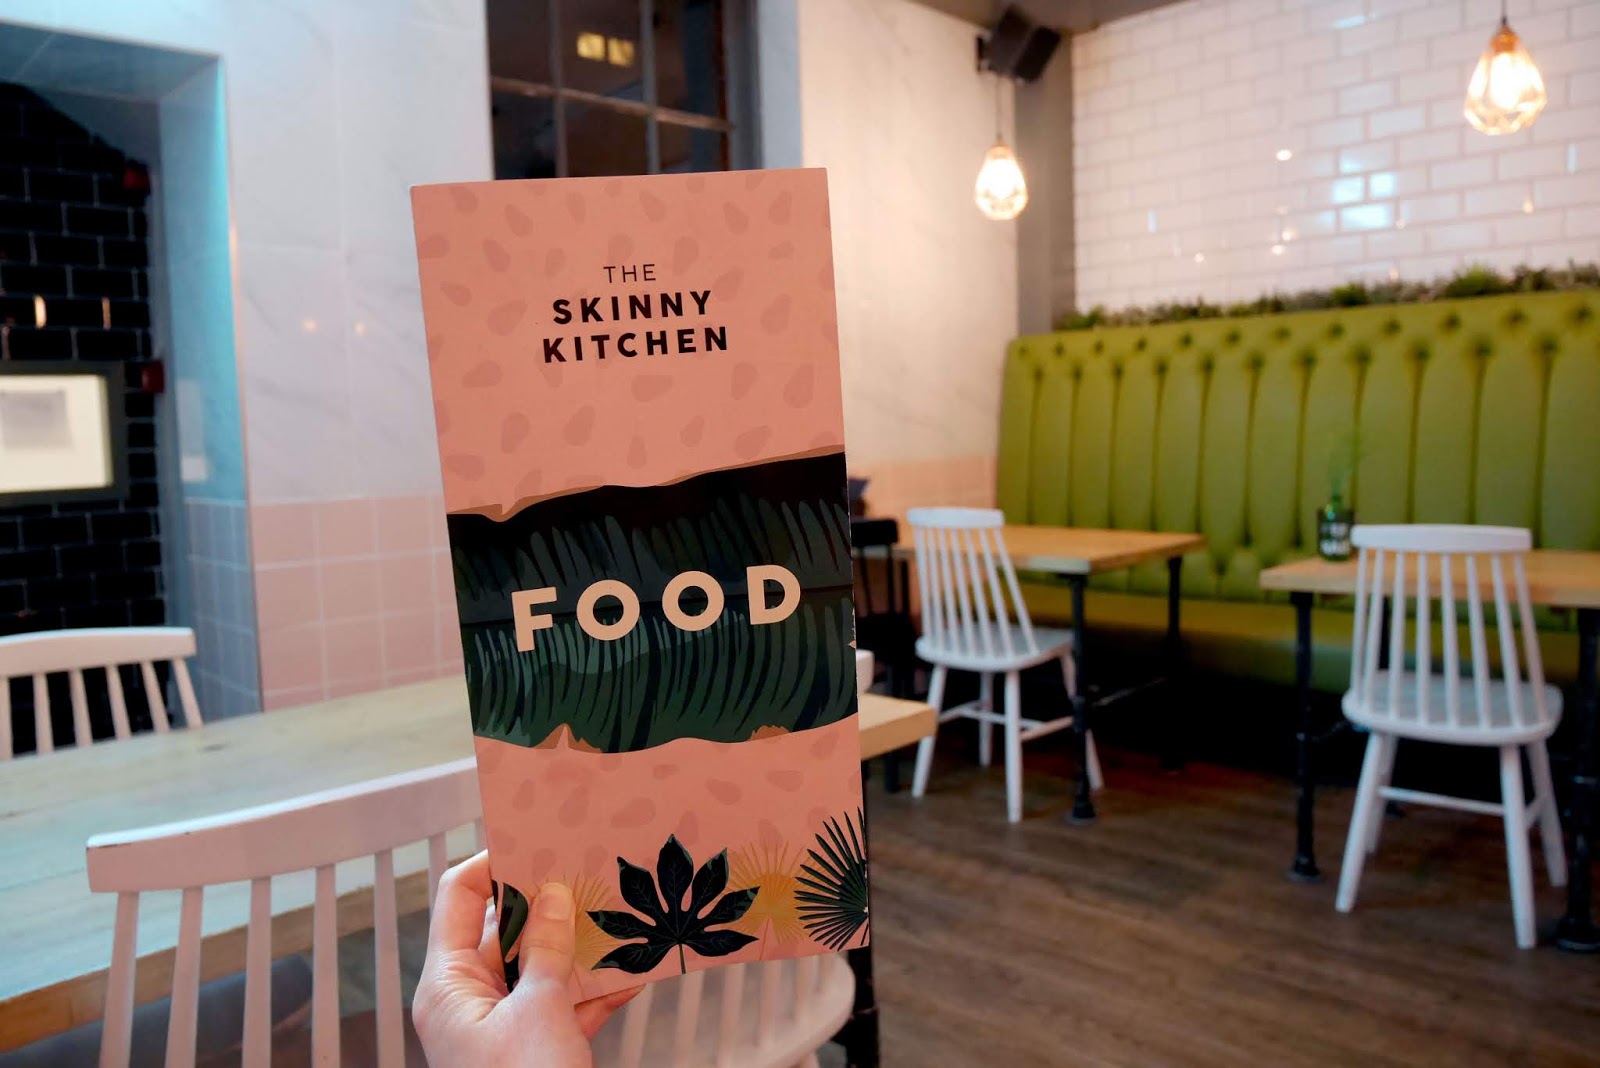 Dining at The Skinny Kitchen in Canterbury, Kent